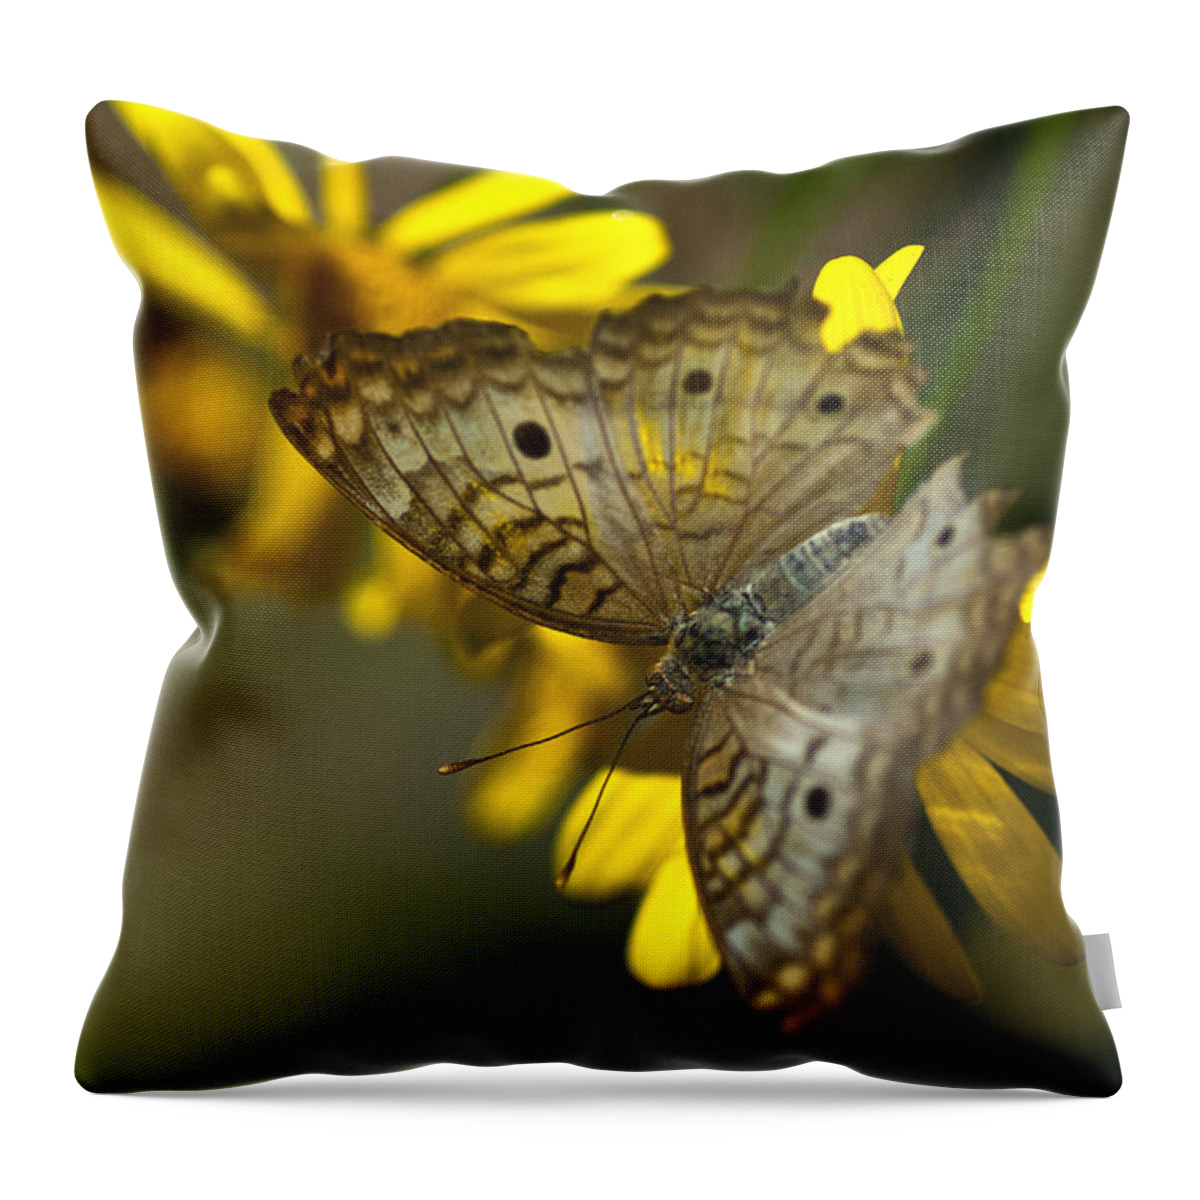 White Peacock Butterfly Throw Pillow featuring the photograph White Peacock Butterfly #5 by Saija Lehtonen